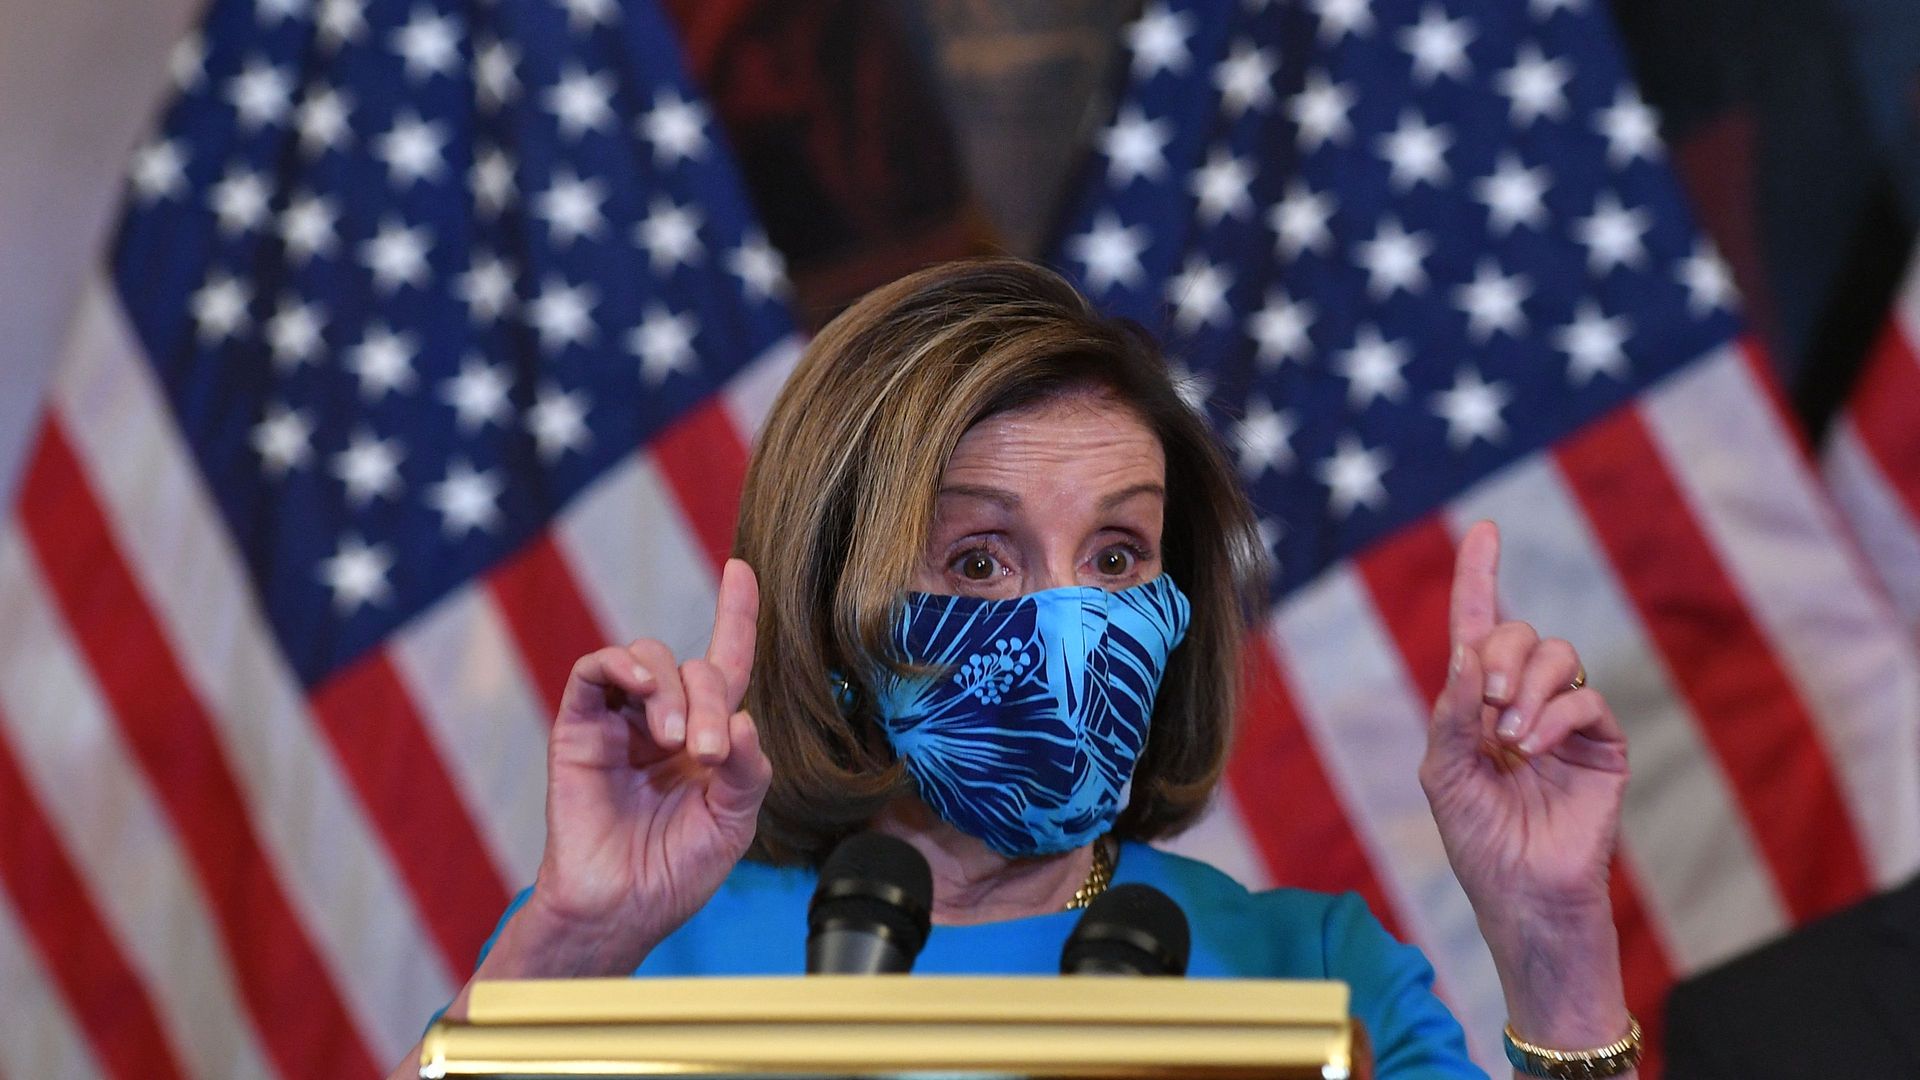 Nancy Pelosi wears a mask while standing in front of American flags